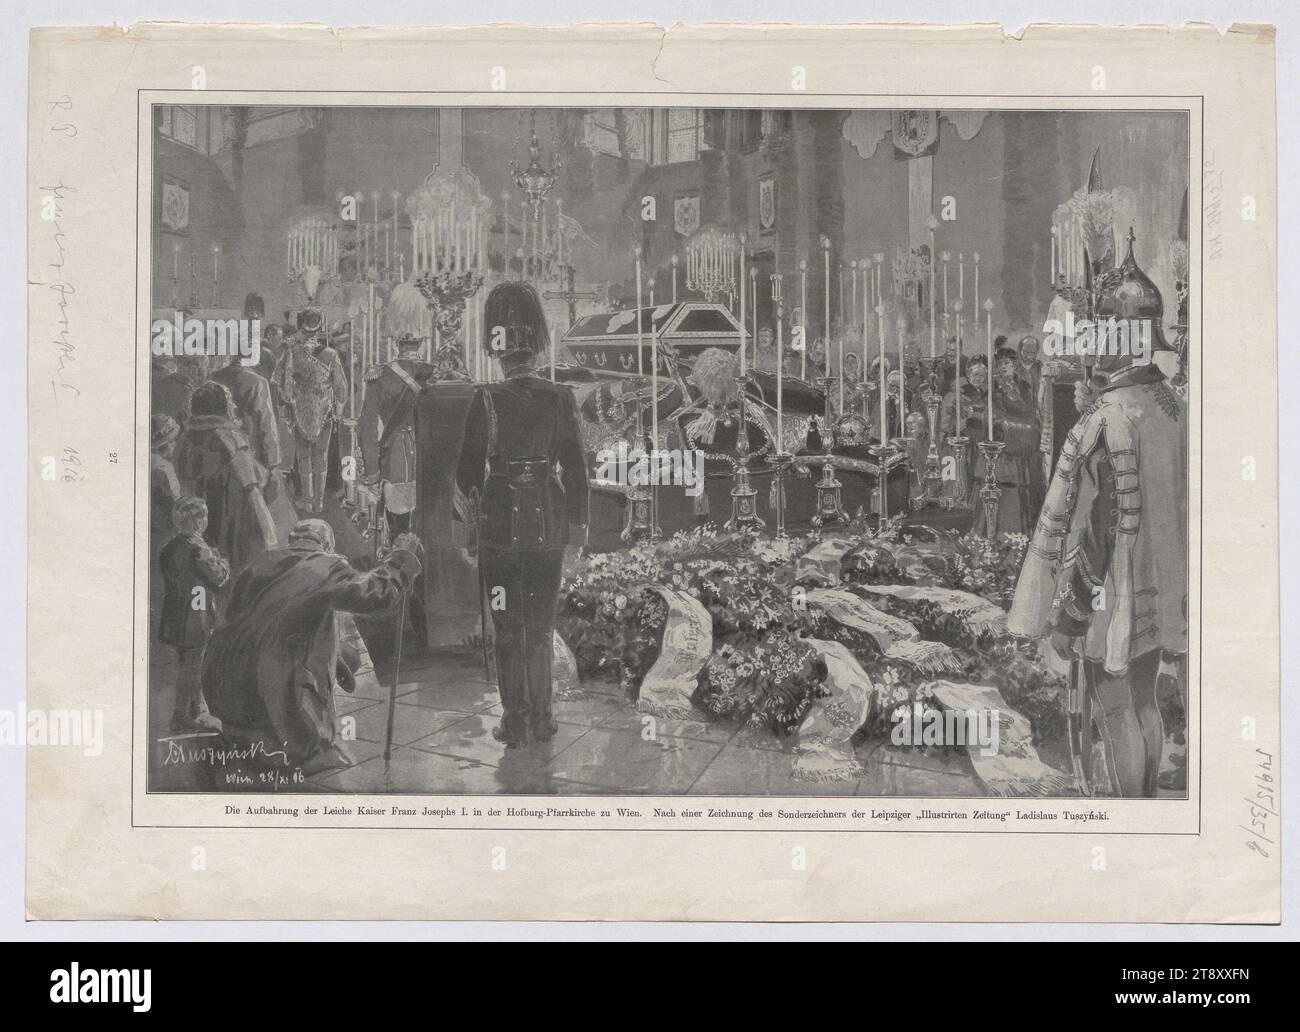 Extract from the 'Illustrierte Zeitung' 1916: Funeral services for Emperor Franz Joseph I on November 30, 1916 ('The laying out of the body of Emperor Franz Joseph I in the Hofburg parish church in Vienna', 'The funeral procession on St. Stephen's Square. '), 1916, newsprint, paper, printing, height 41, 3 cm, width 29, 7 cm, Media and Communication, Disease and Death, Habsburgs, Fine Arts, Dynastic Events, public funeral, funerary ceremonial, coffin, newspaper, news-sheet, The Vienna Collection Stock Photo